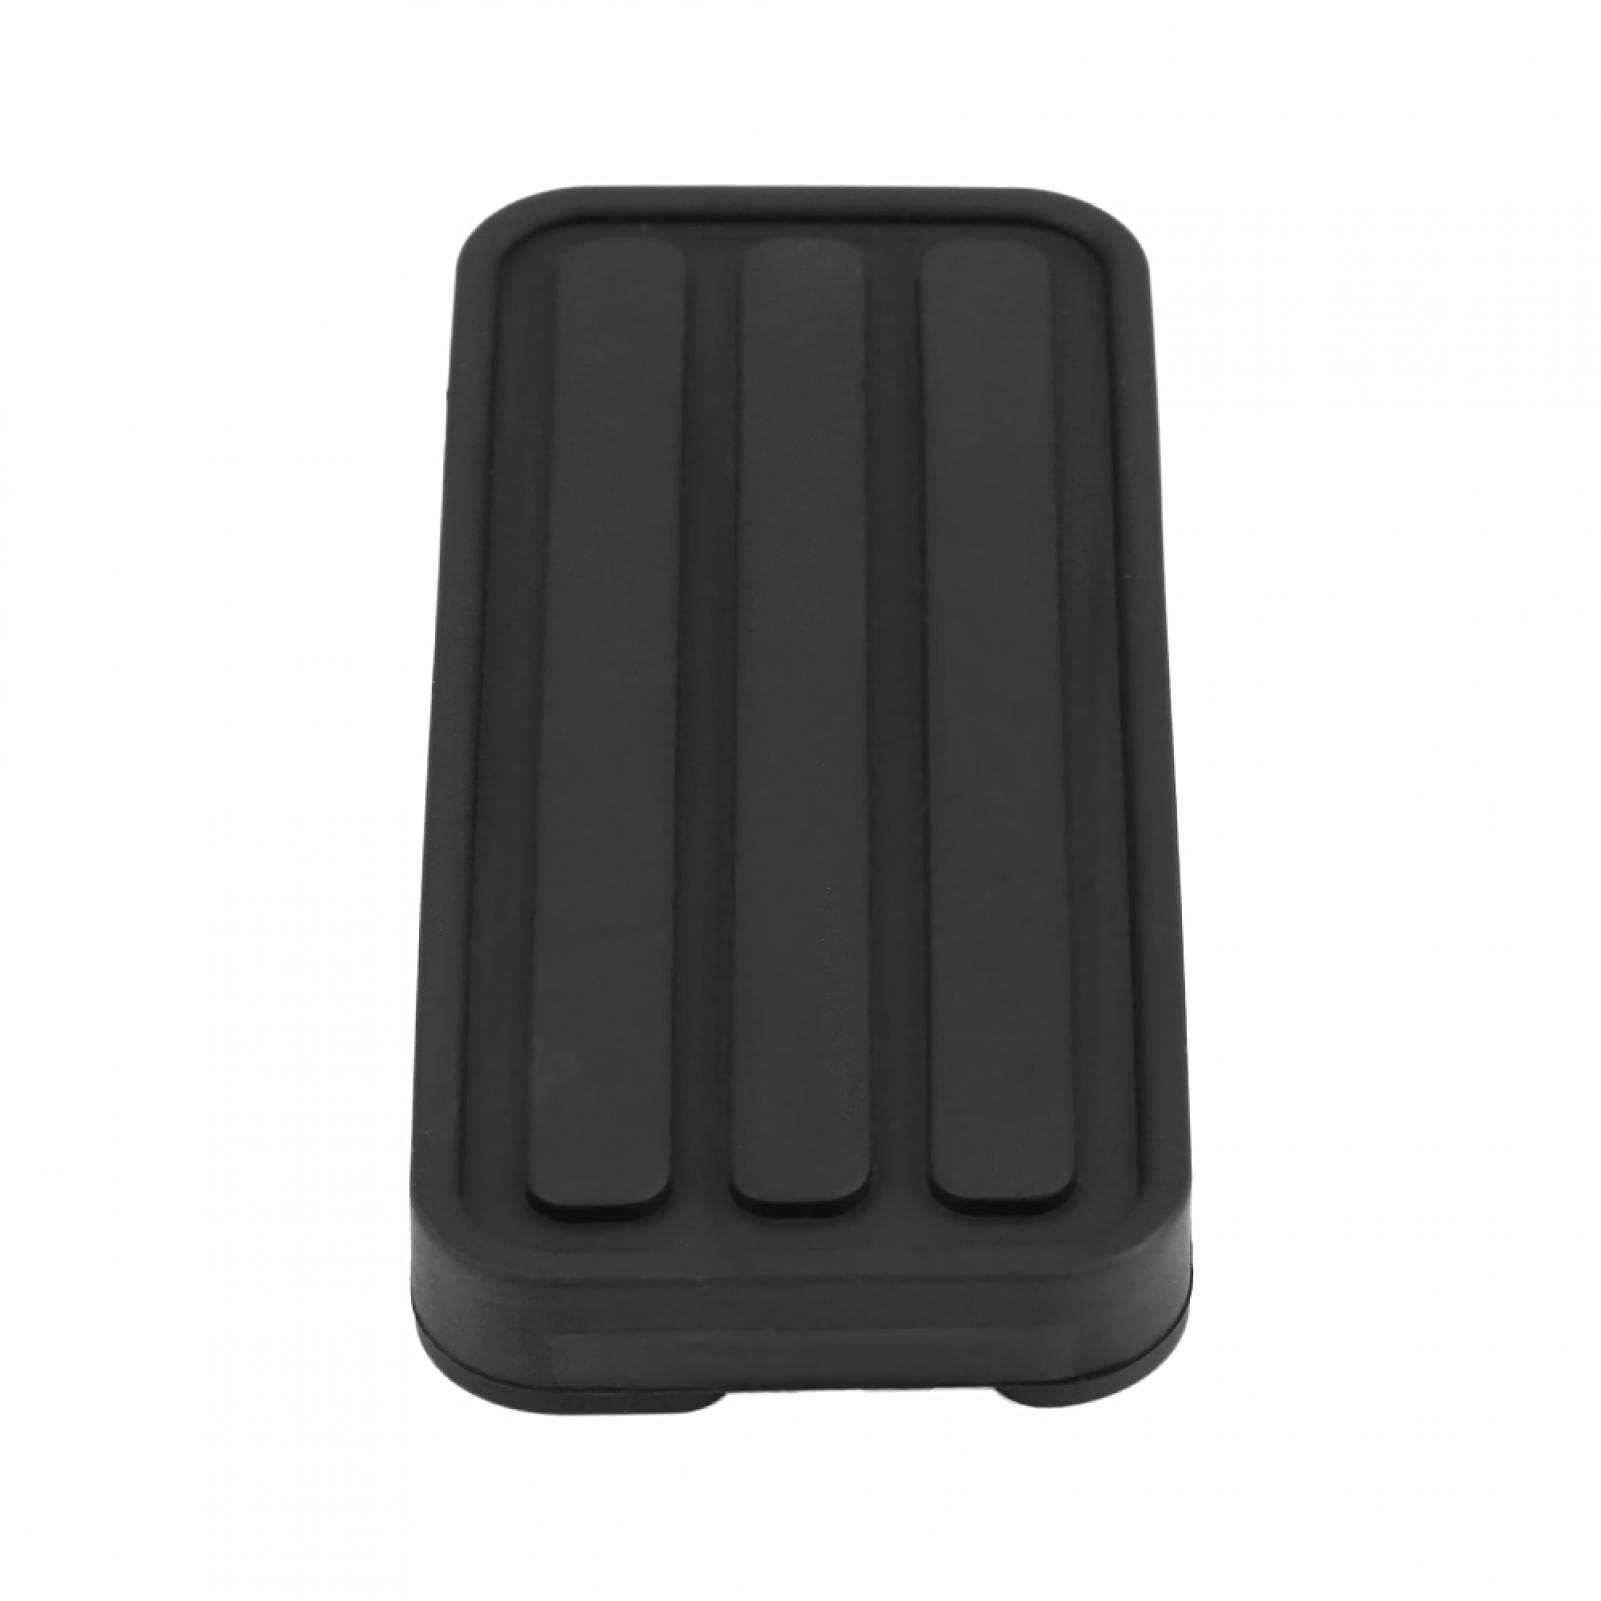 171721647, High Toughness Accelerator Pedal Pad Rubber Wearproof for Upgrade von AMONIDA